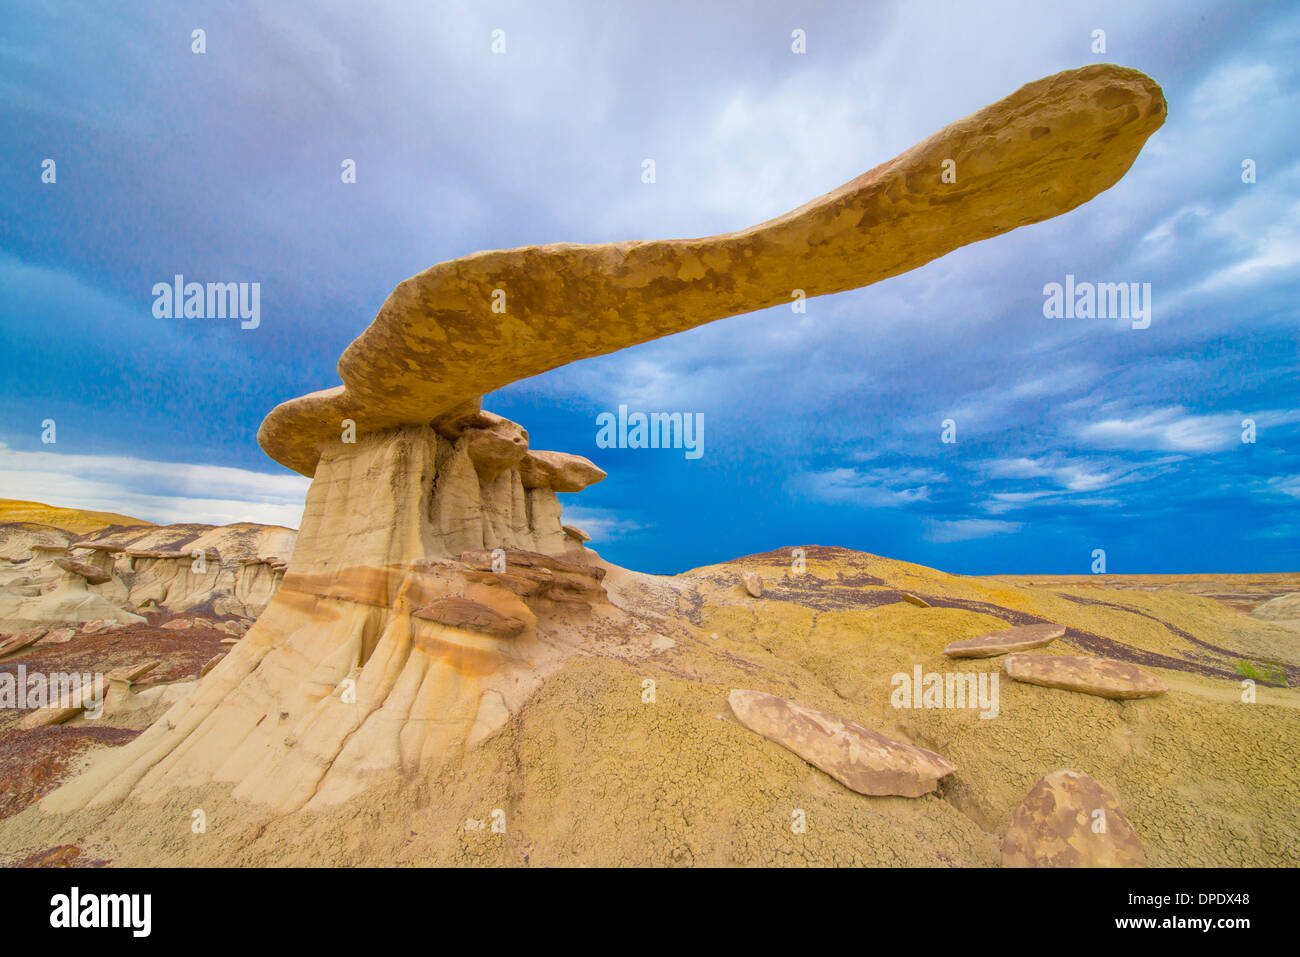 Balanced rock tongue in BLM wilderness, New Mexico, Badlands in northwest corner of the state Stock Photo